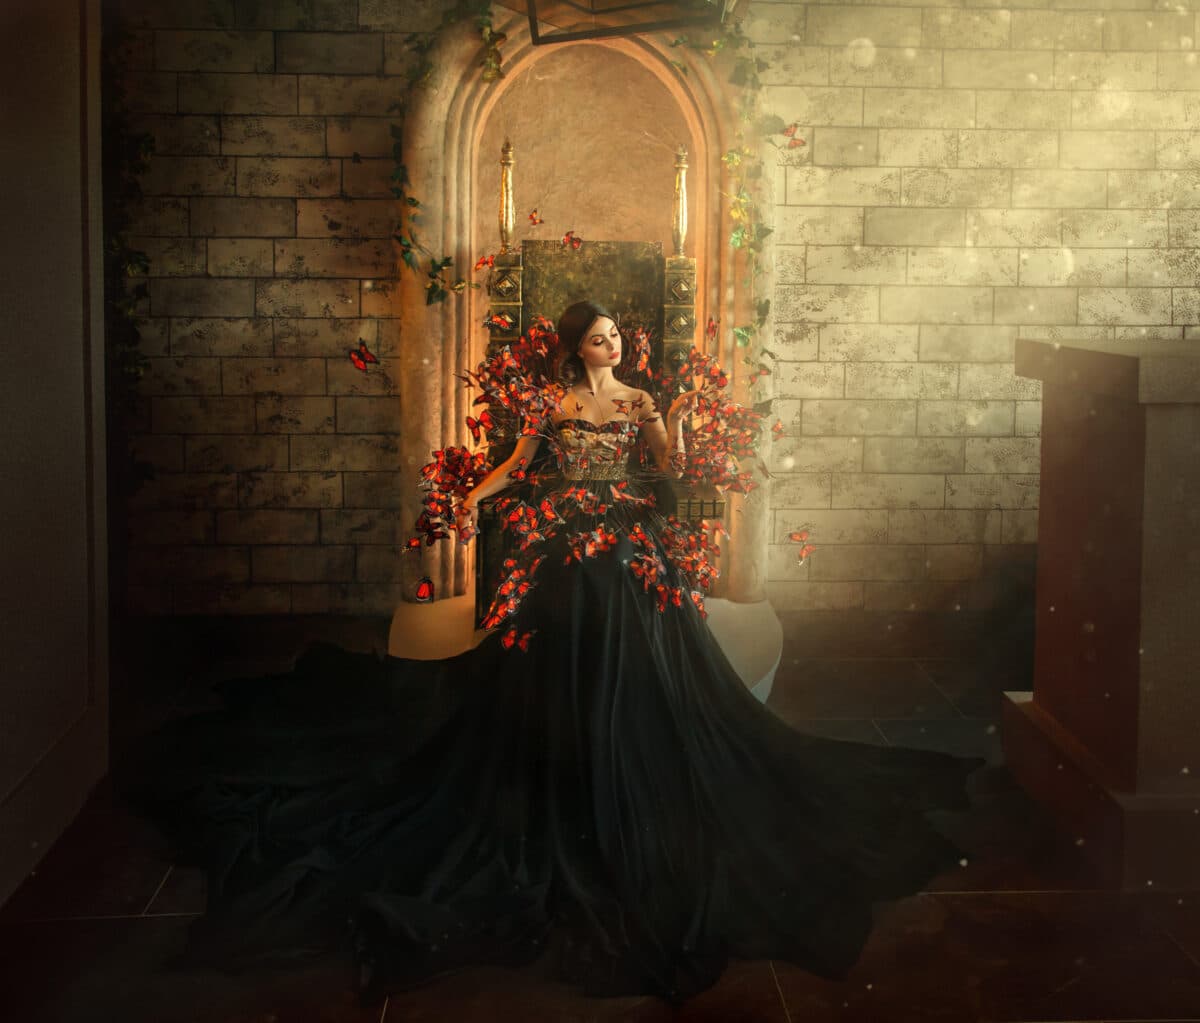 gothic dark queen sits in castle on golden throne. black dress with butterflies. Brick wall, large gothic room, magical sun rays from window. Long train fashionable silk skirt. Glamorous fantasy woman